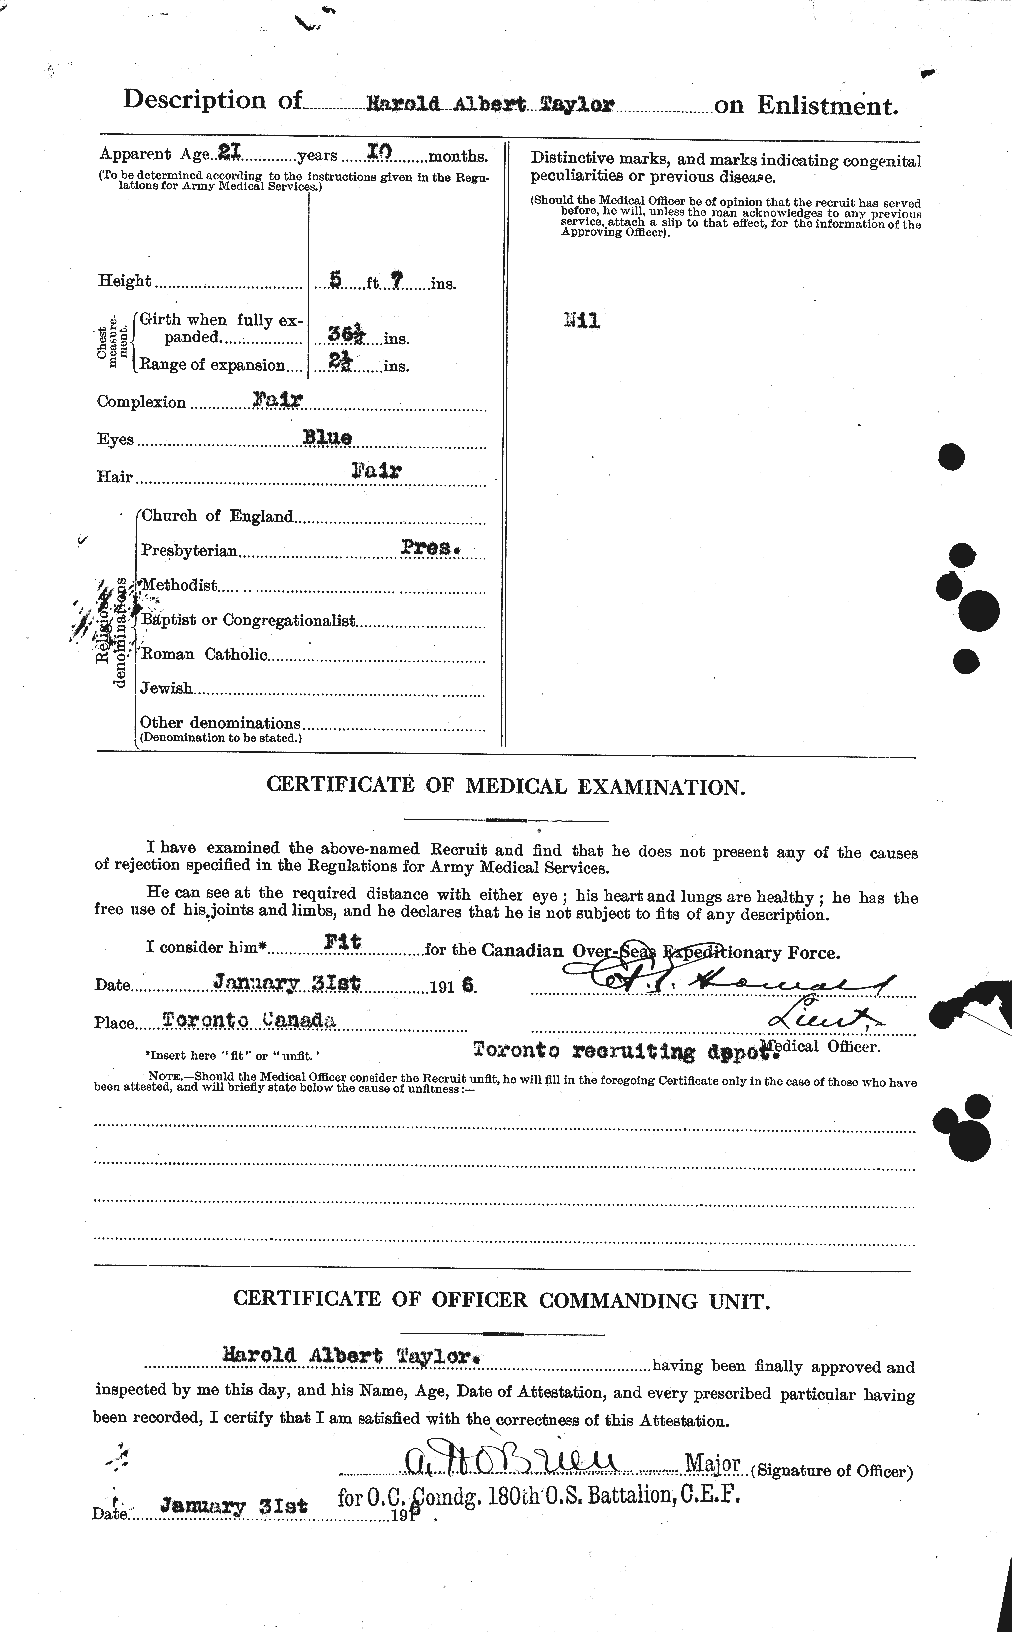 Personnel Records of the First World War - CEF 626413b